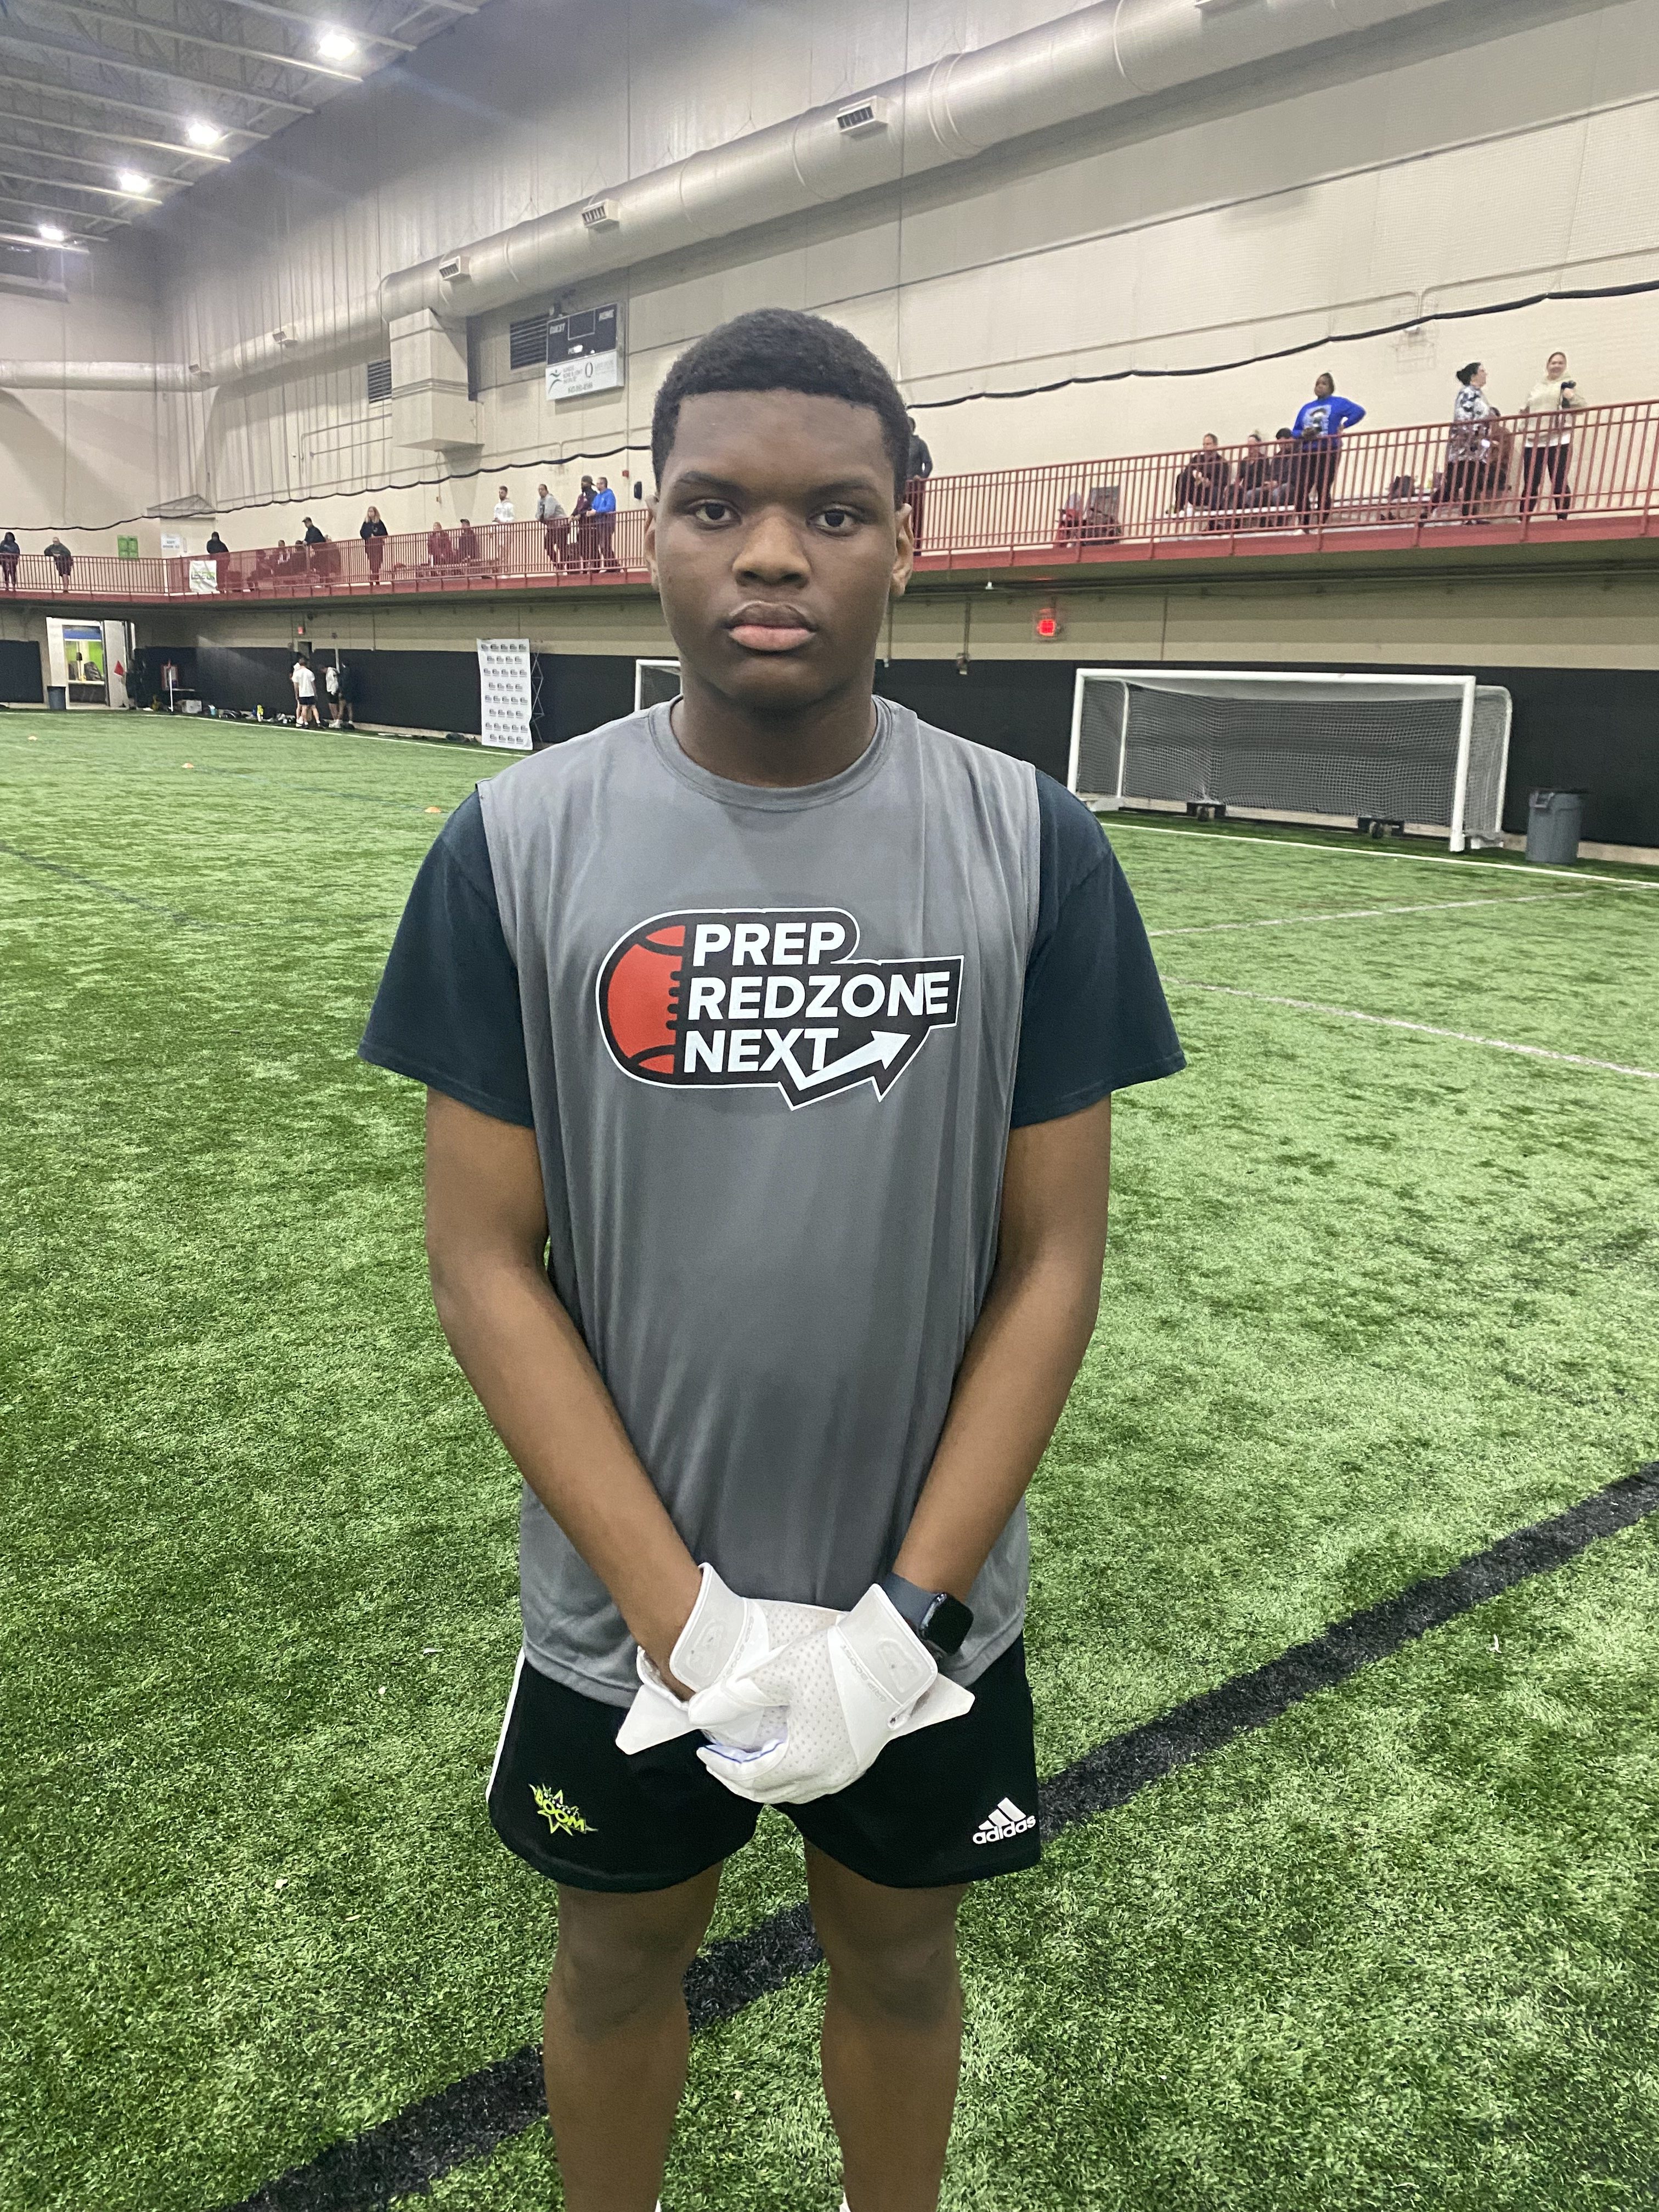 <span class="pn-tooltip pn-player-link">
        <span class="name-pointer">Illinois Rising Prospect Tour Showcase GameChangers.</span>
        <span class="info-box not-prose" style="background: linear-gradient(to bottom, rgba(193,25,32, 0.95) 0%,rgba(193,25,32, 1) 100%)">
            <a href="https://prepredzone.com/2023/04/illinois-rising-prospect-tour-showcase-gamechangers/" class="link-wrap">
                                    <span class="player-img"><img src="https://prepredzone.com/wp-content/uploads/sites/3/2023/04/GameChangers-Created-Logo-2.png?w=150&h=150&crop=1" alt="Illinois Rising Prospect Tour Showcase GameChangers."></span>
                
                <span class="player-details">
                    <span class="first-name">Illinois</span>
                    <span class="last-name">Rising Prospect Tour Showcase GameChangers.</span>
                    <span class="measurables">
                                            </span>
                                    </span>
                <span class="player-rank">
                                                        </span>
                                    <span class="state-abbr"></span>
                            </a>

            
        </span>
    </span>
